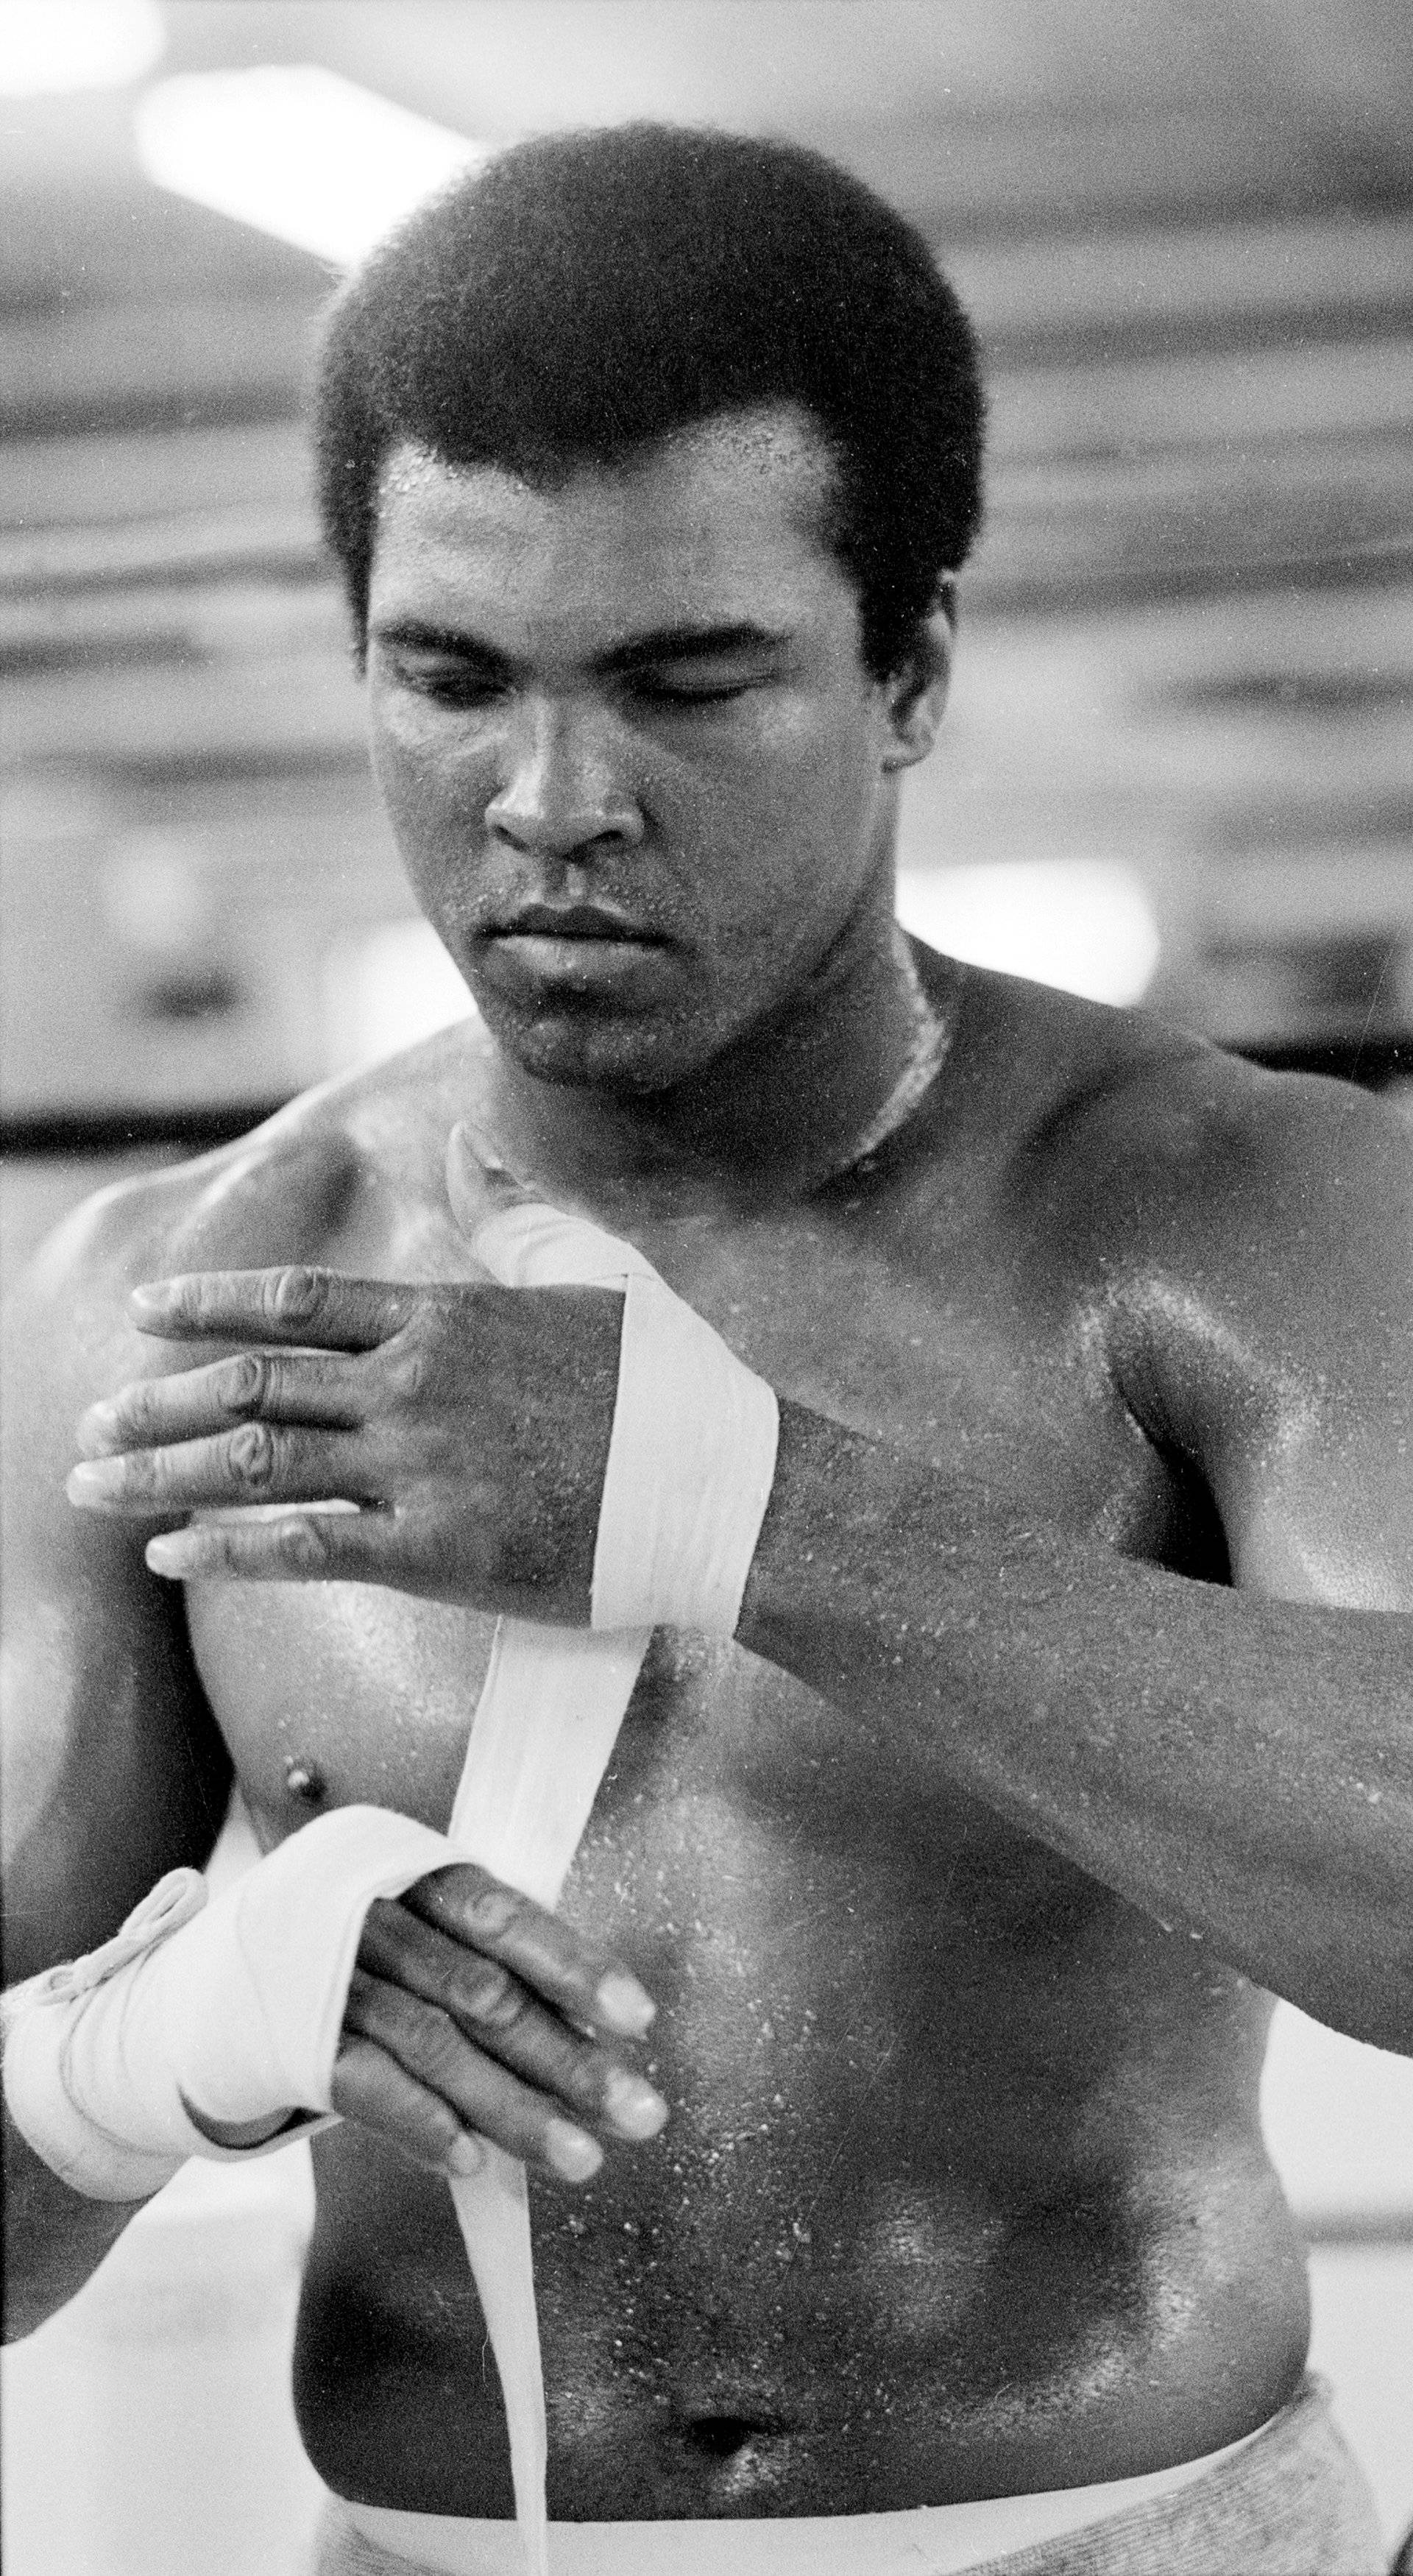 Muhammad Ali (formerly Cassius Clay) trains at his Deer Lake mountain retreat in Owigsburg